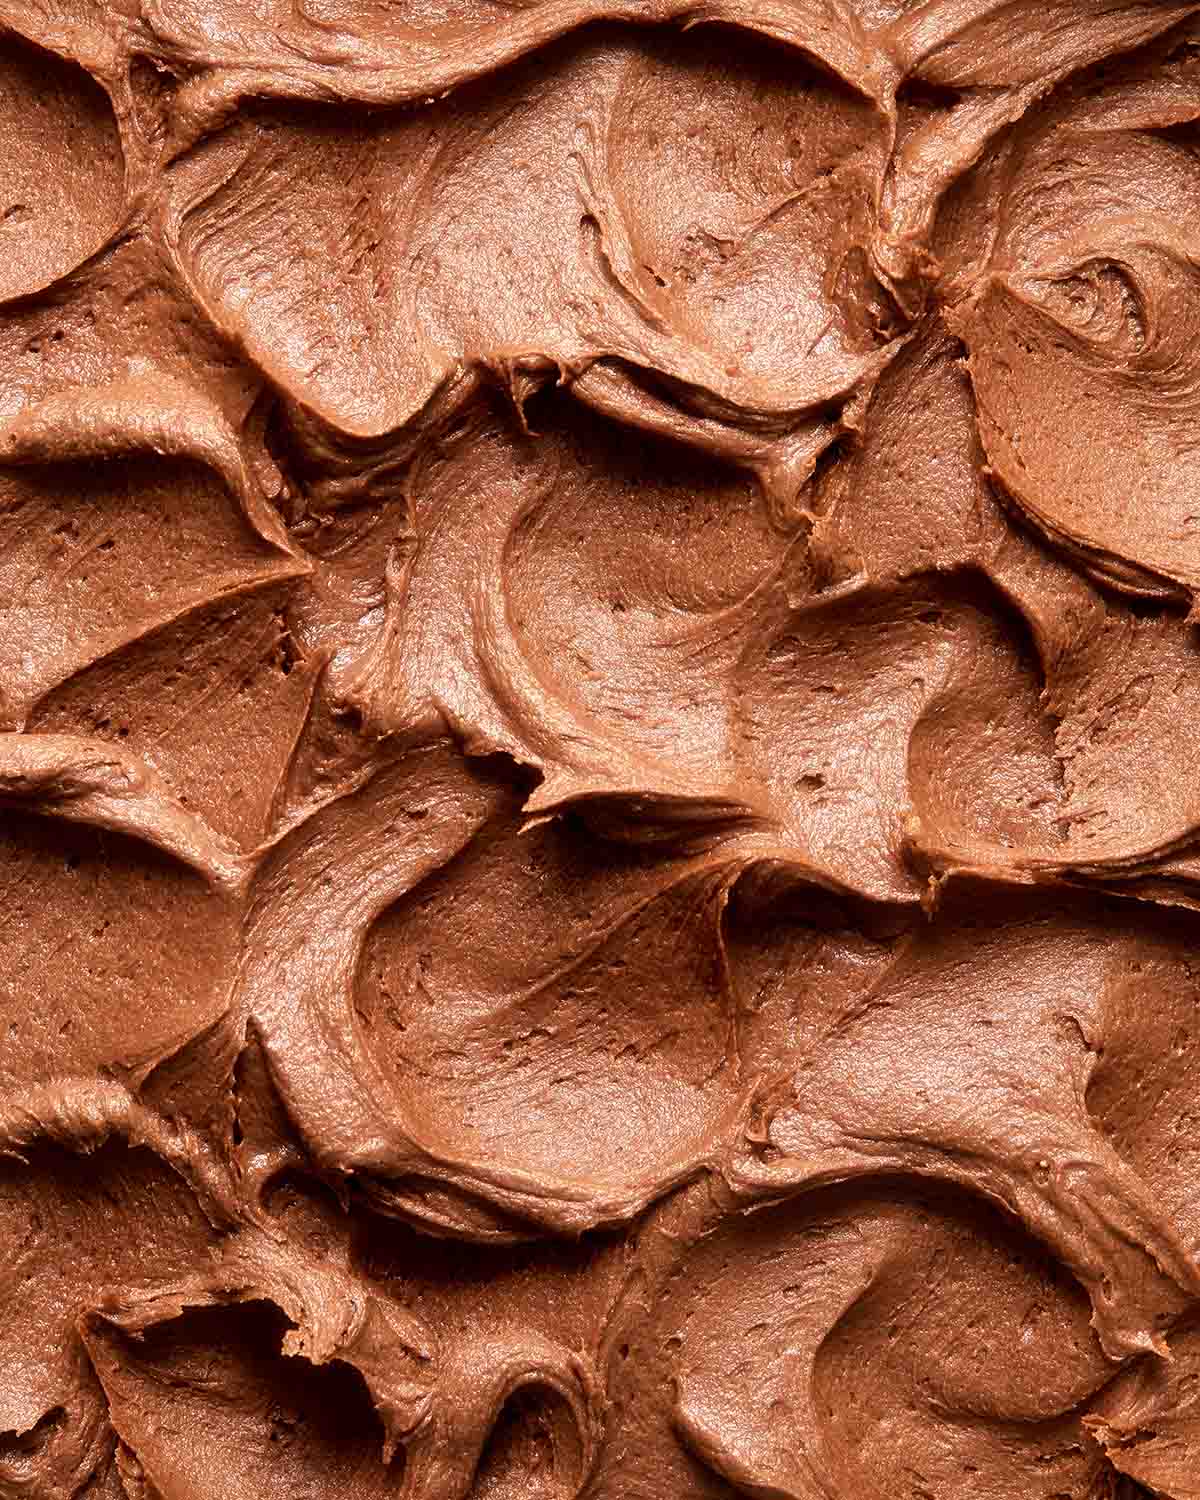 Close up view of chocolate peanut butter frosting.